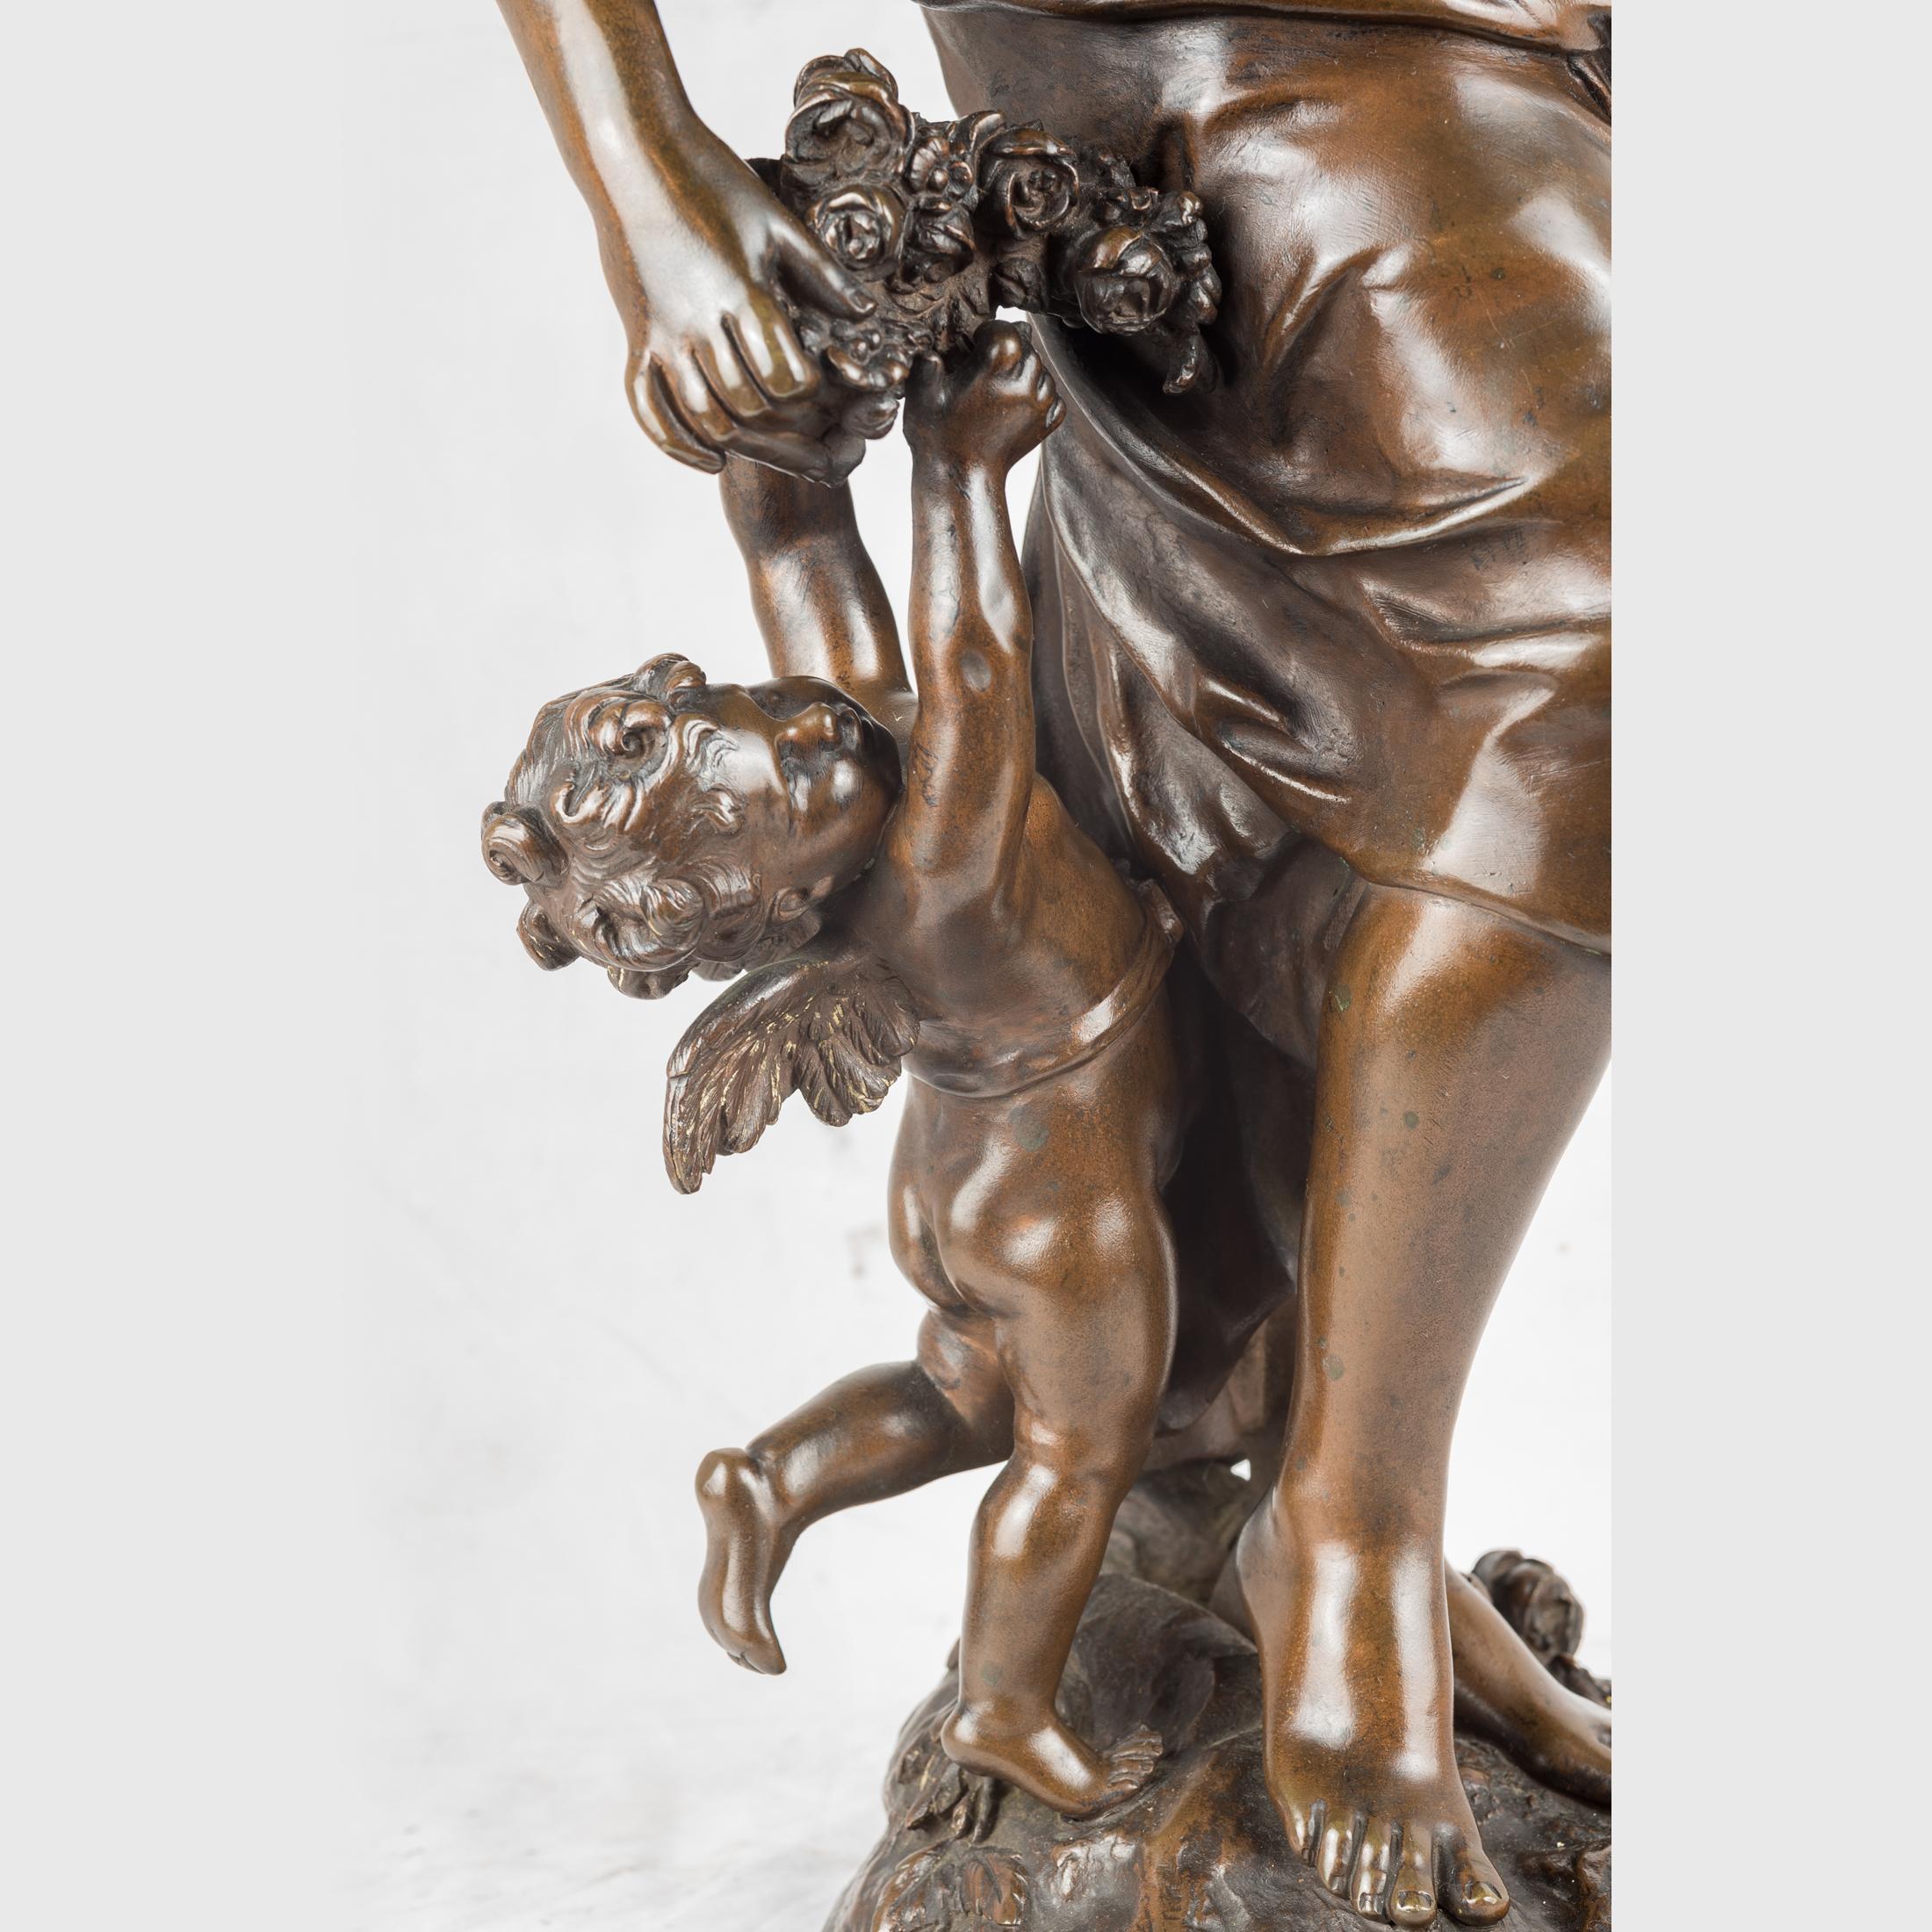 Figural Group of Venus Flanked by Putti - Gold Figurative Sculpture by Louis Auguste Moreau